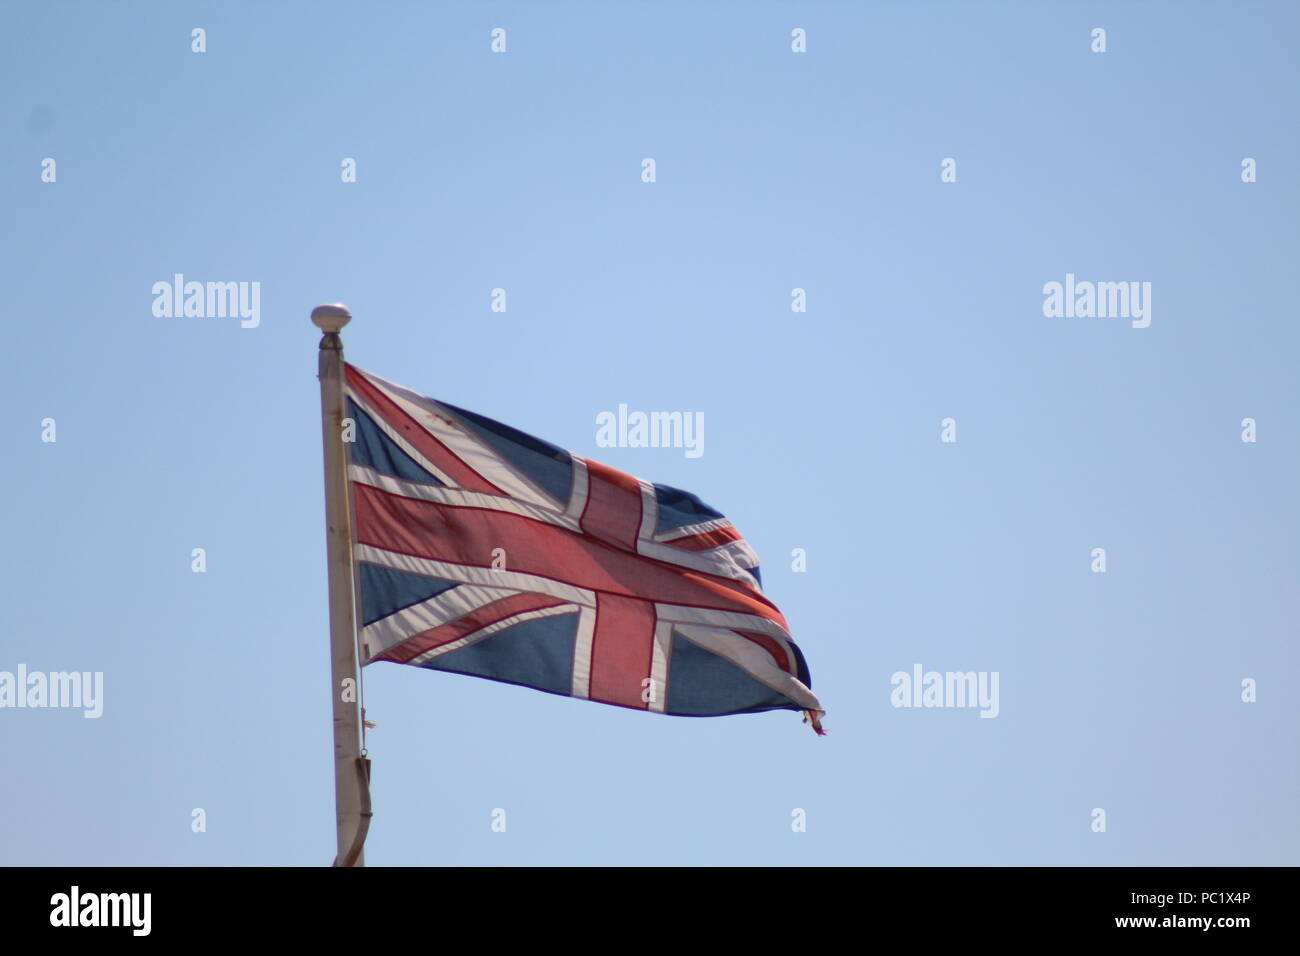 Union flag flying in blue skies Stock Photo